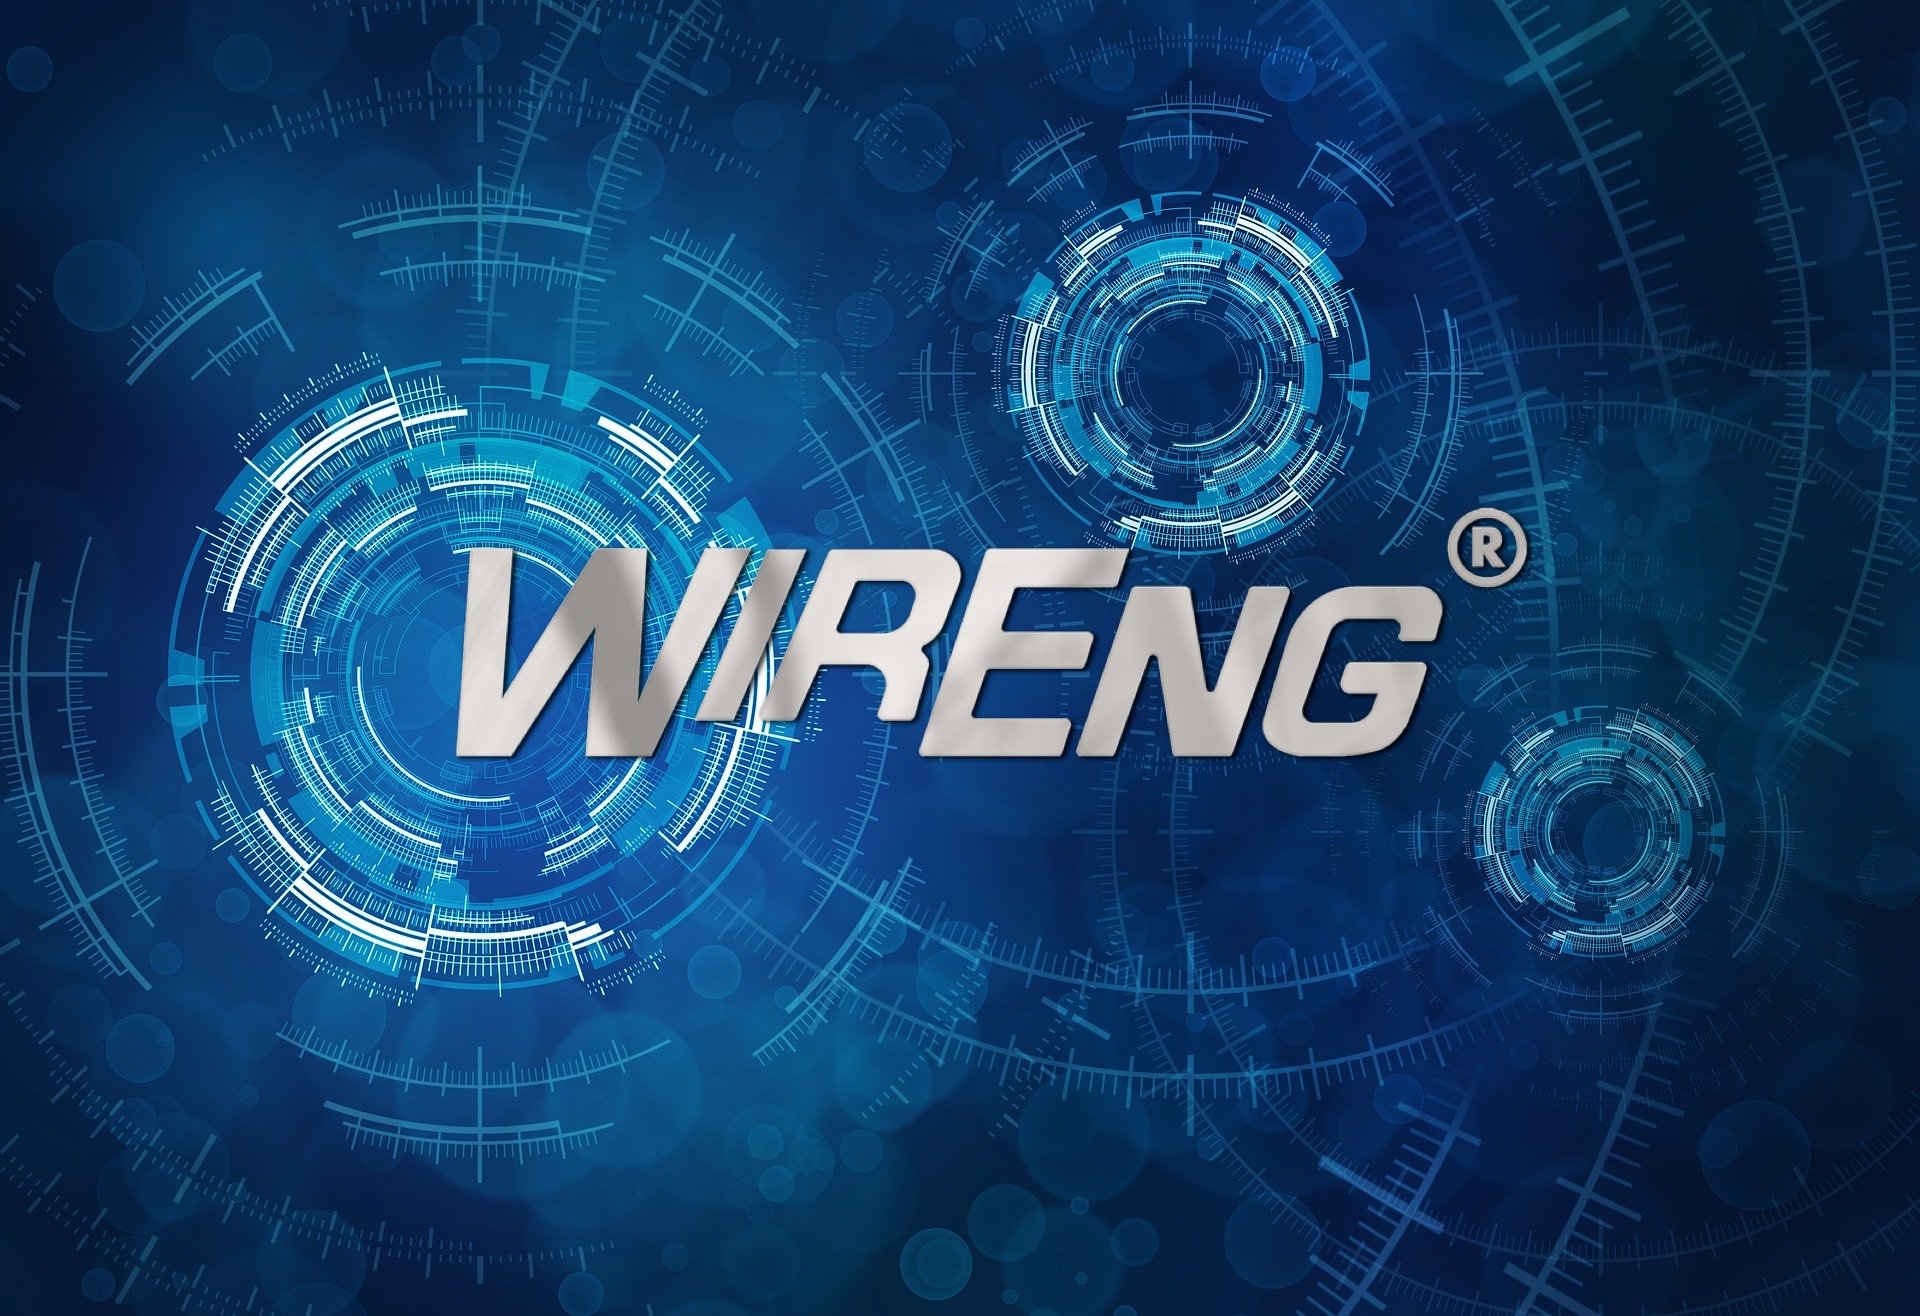 About WirEng®